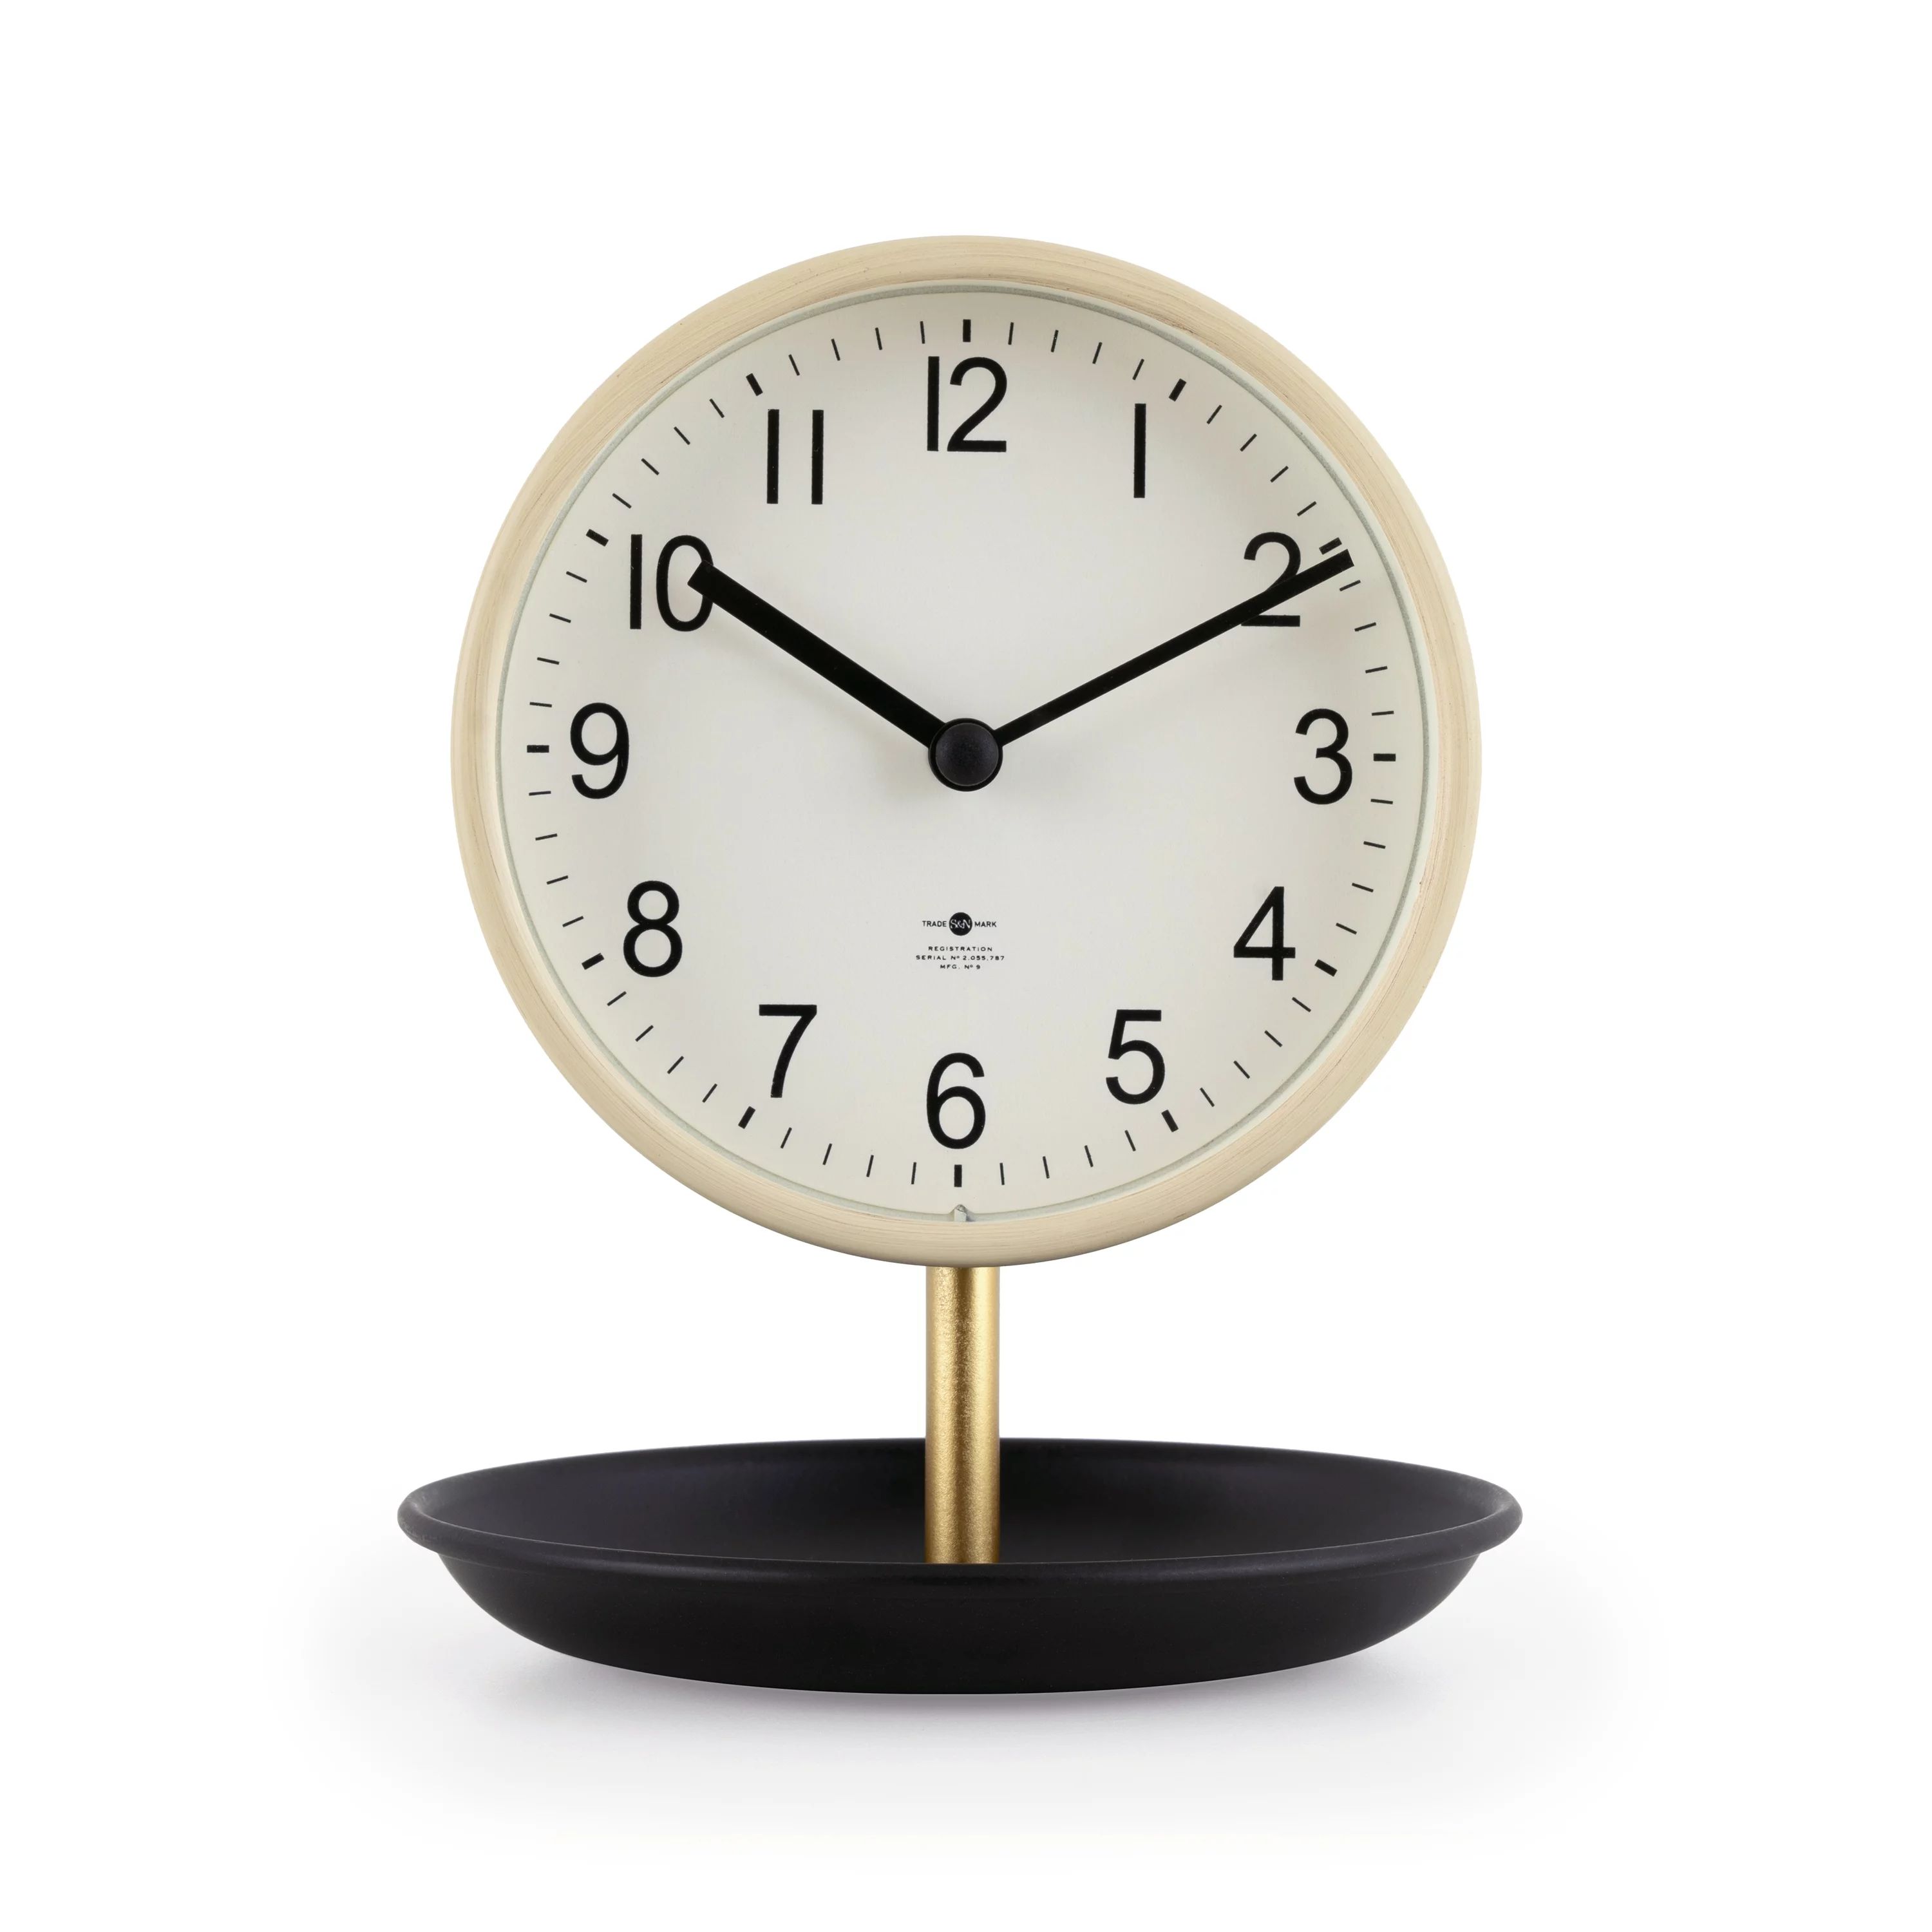 Better Homes & Garden Light Tan and Black Tabletop Round Analog Dial Clock with Trinket Tray Base | Walmart (US)